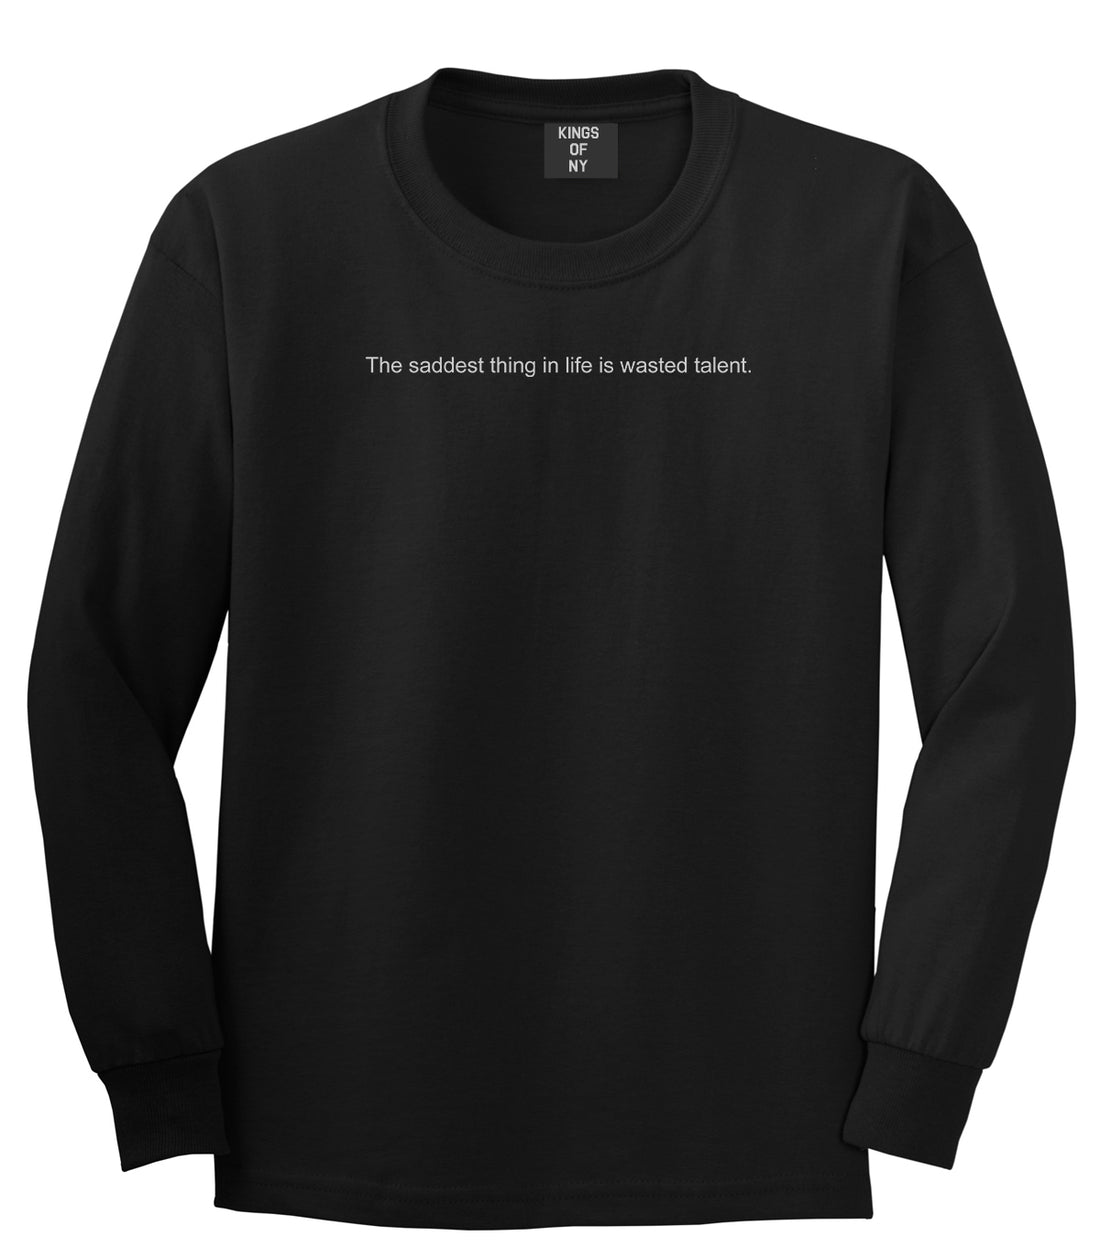 The Saddest Thing In Life Is Wasted Talent Mens Long Sleeve T-Shirt Black